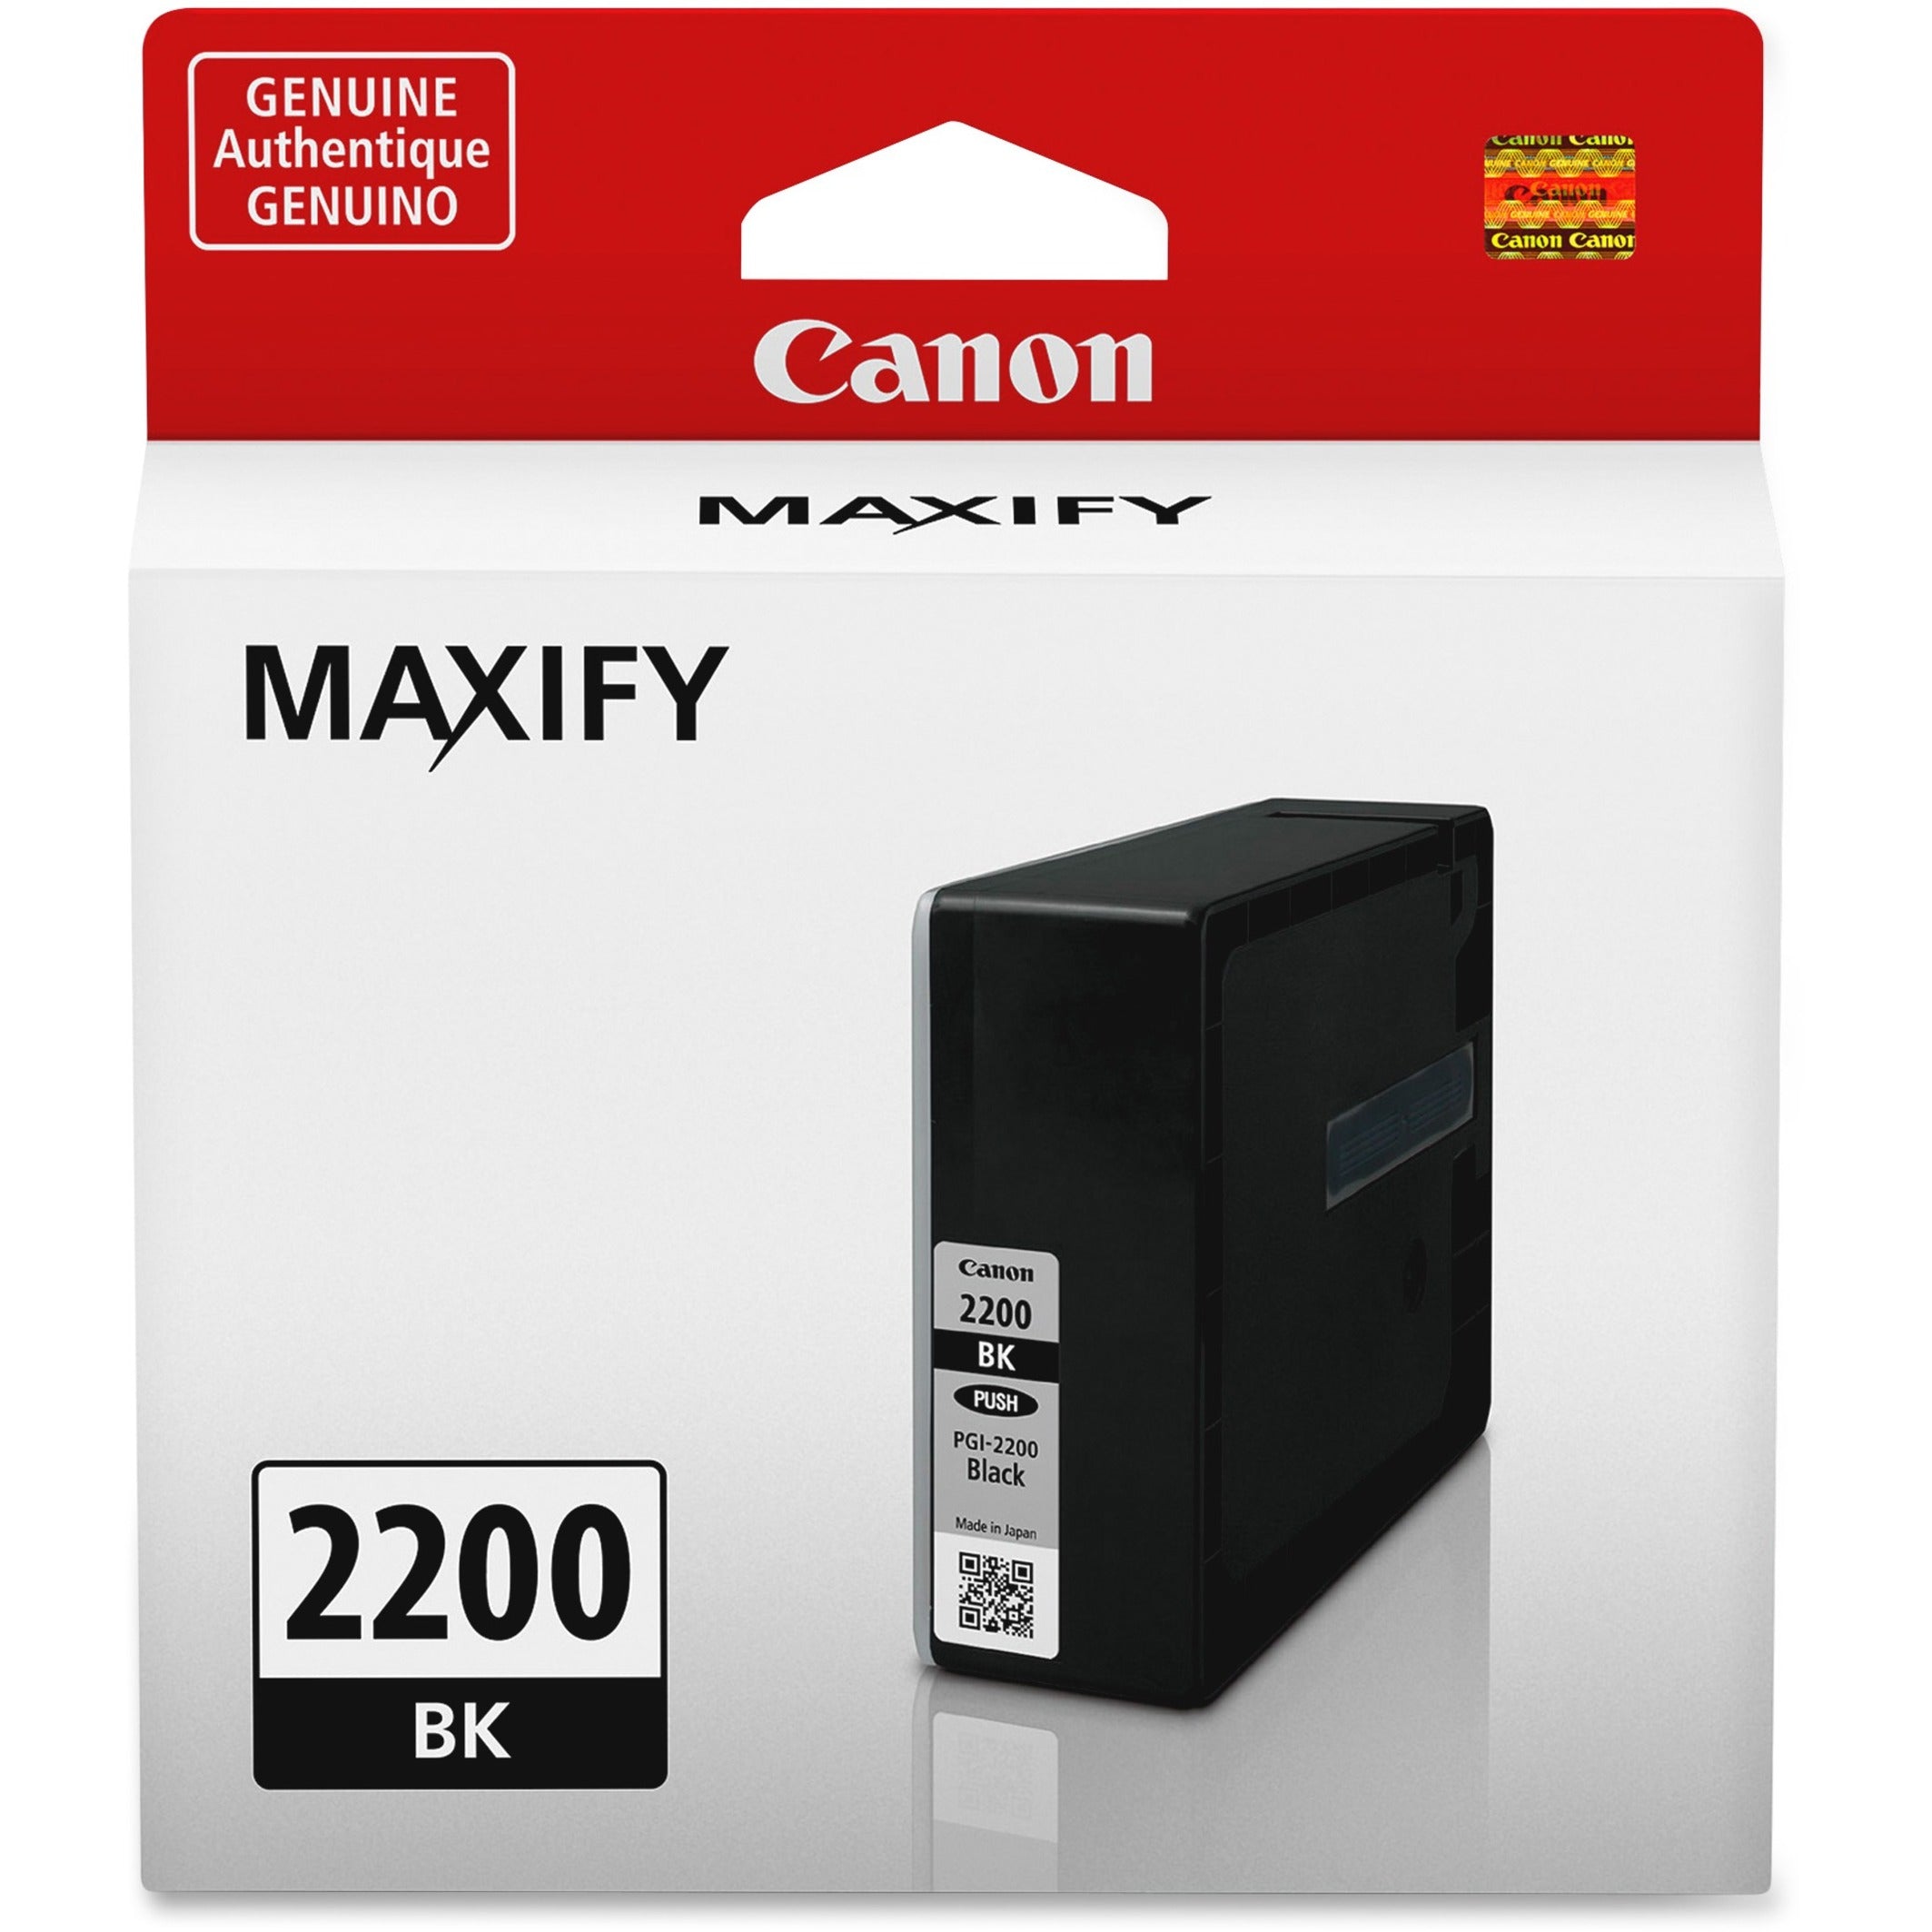 Canon 9291B001 PGI-2200 Black Pigment Ink Tank, Smudge Resistant, Highlighter Resistant, 29.1 mL, 1000 Pages